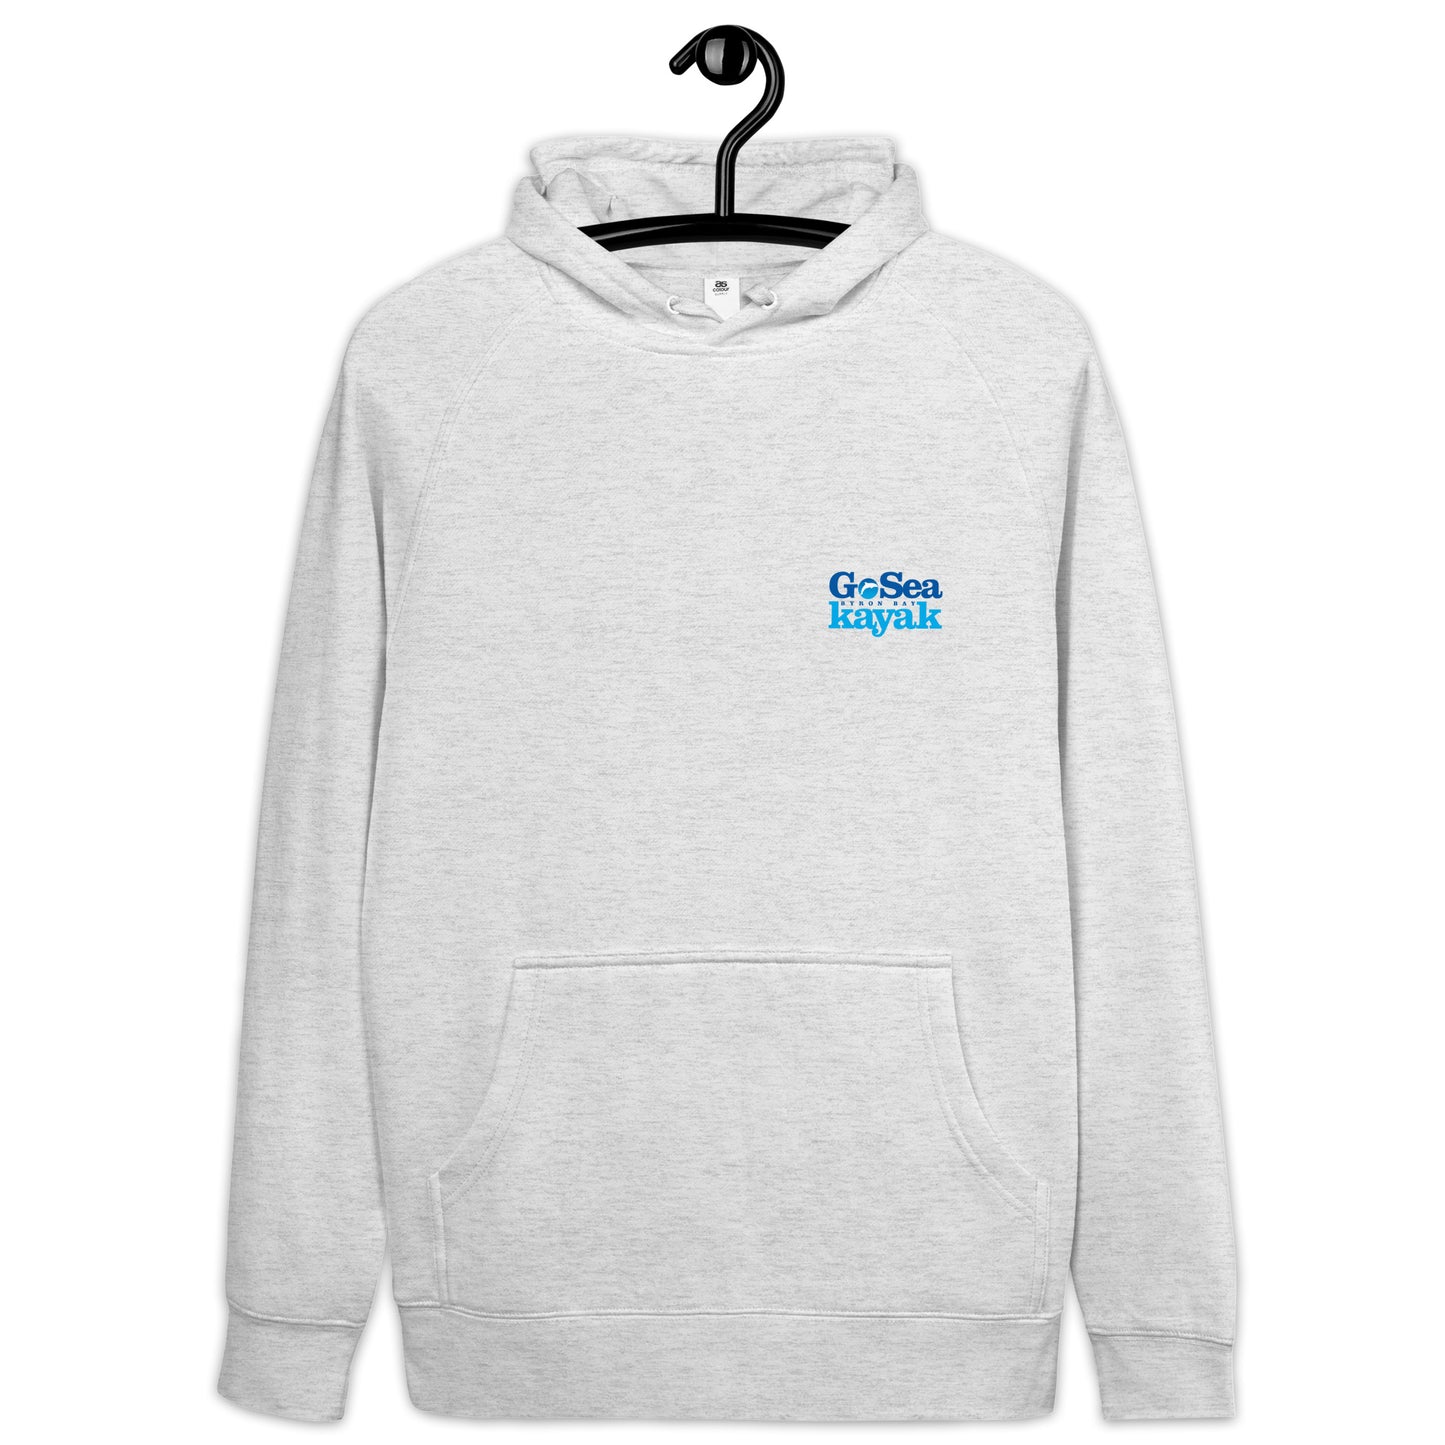  Unisex Hoodie - White Marle / light grey - Front flat lay view - Go Sea Kayak Byron Bay logo on back and front, Kangaroo pocket on front - Genuine Byron Bay Merchandise | Produced by Go Sea Kayak Byron Bay 